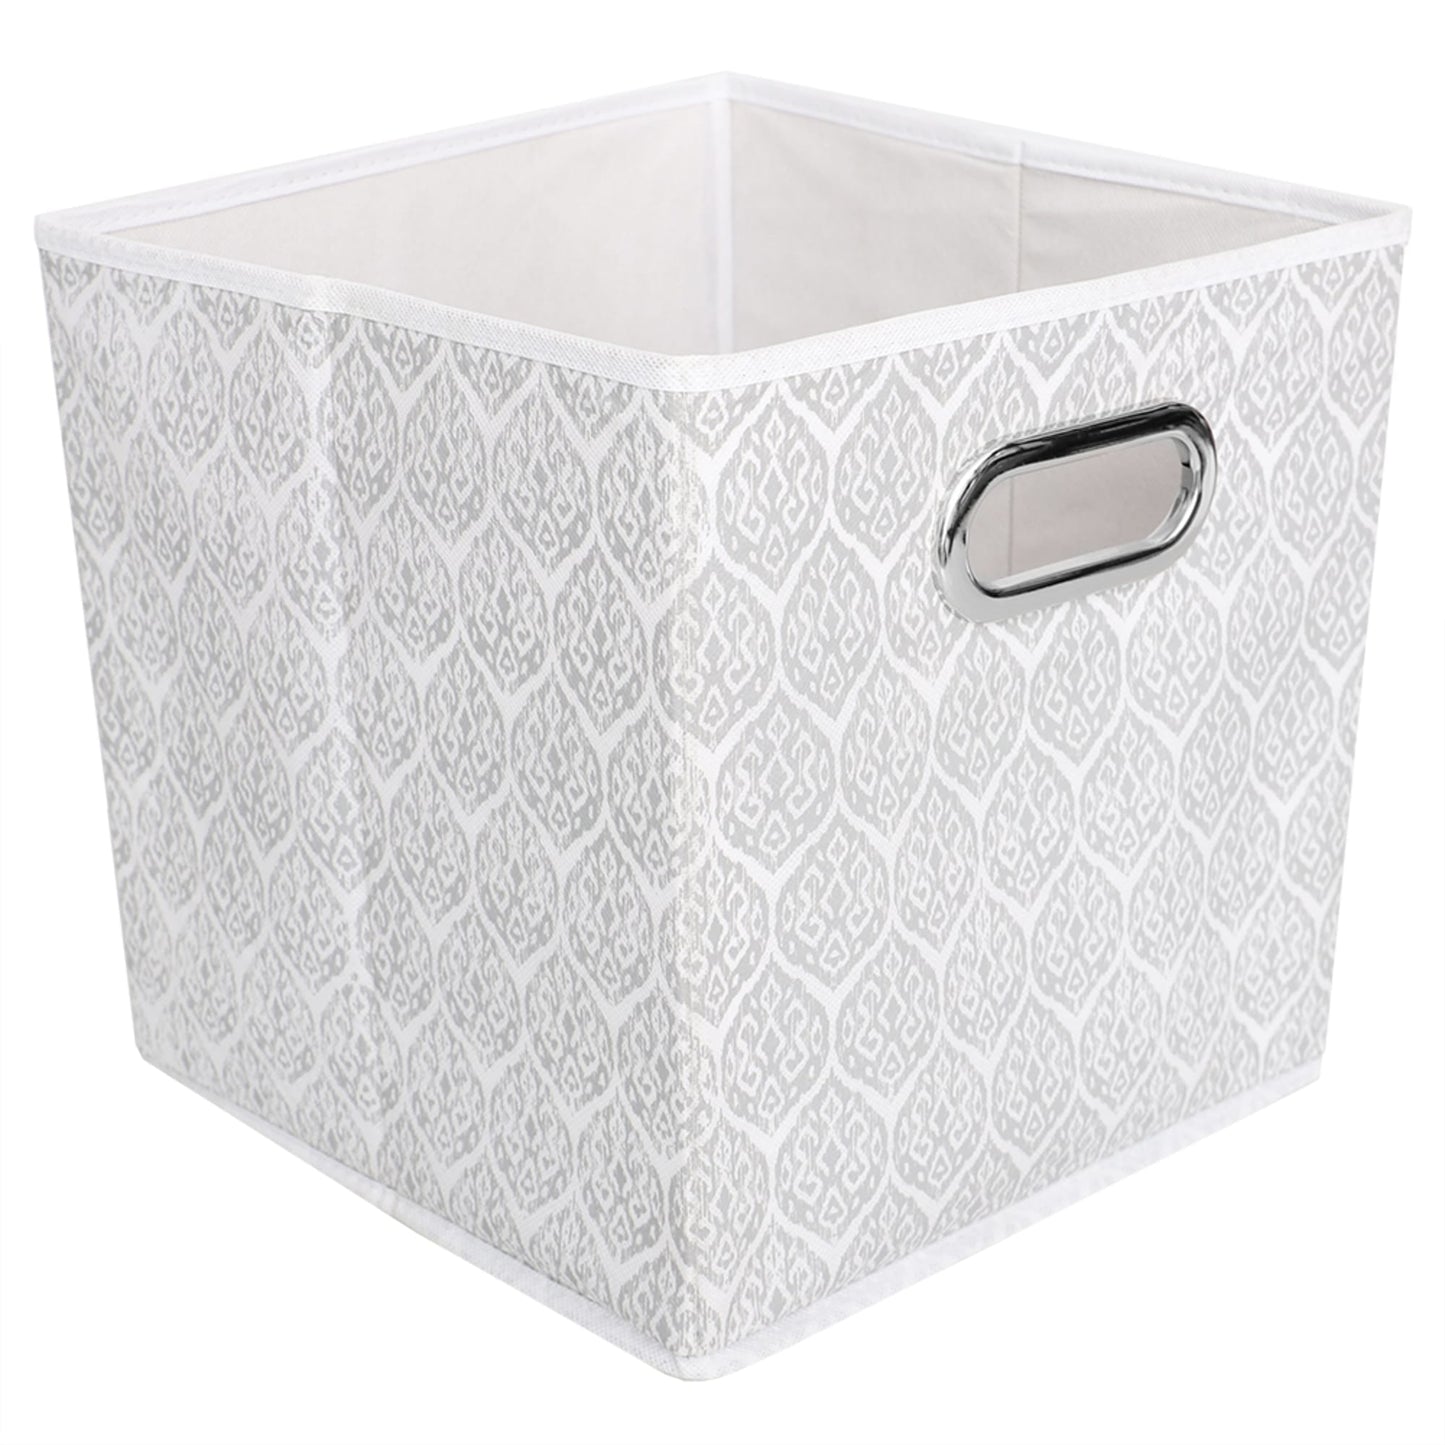 Ikat Collapsible Non-Woven Storage Bin with Grommet Handle, Grey